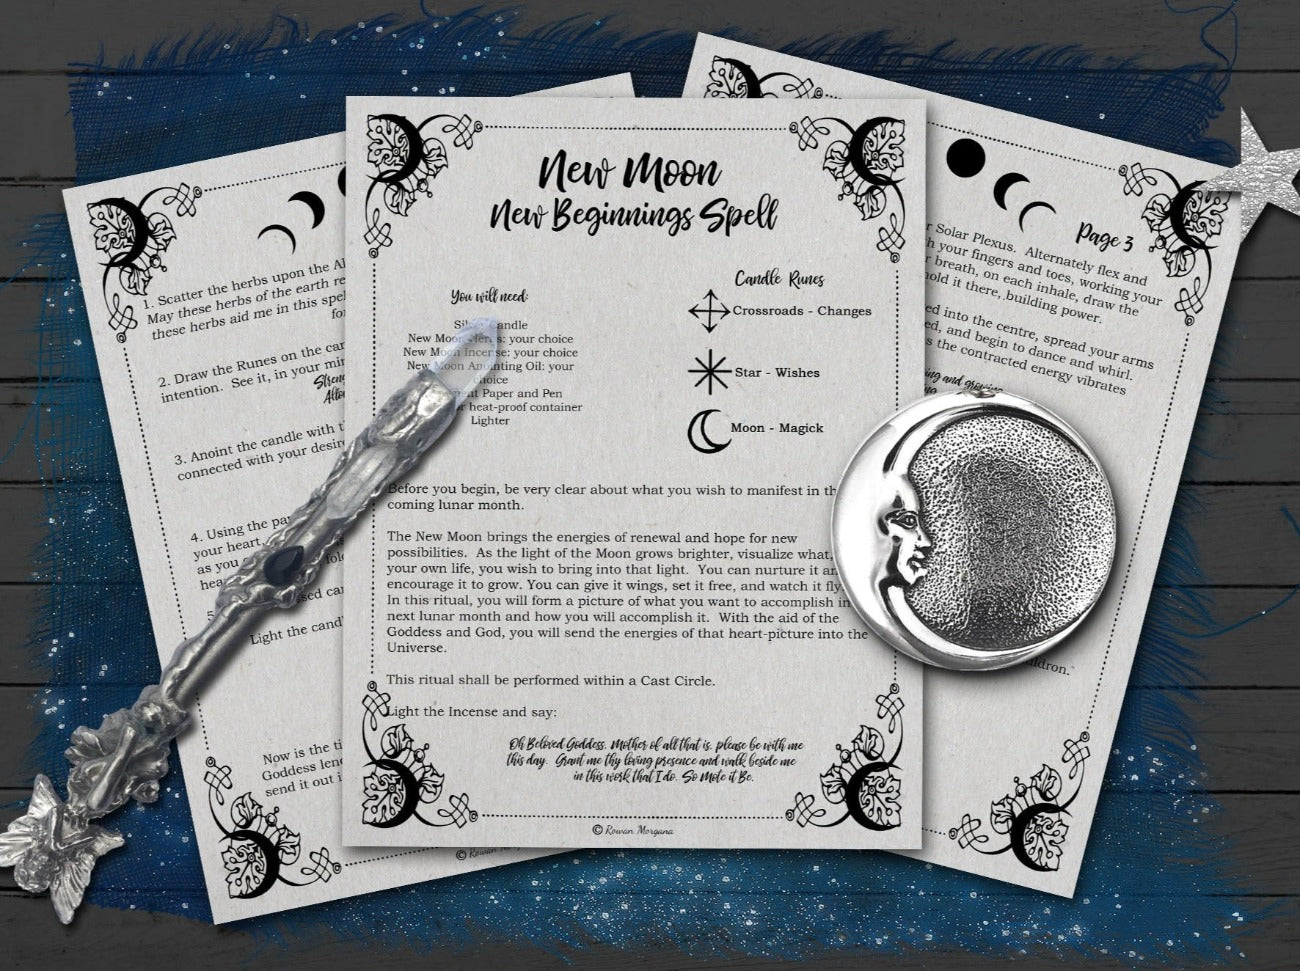 New Moon Beginnings Spell, Printable 3 Pages - Morgana Magick Spell